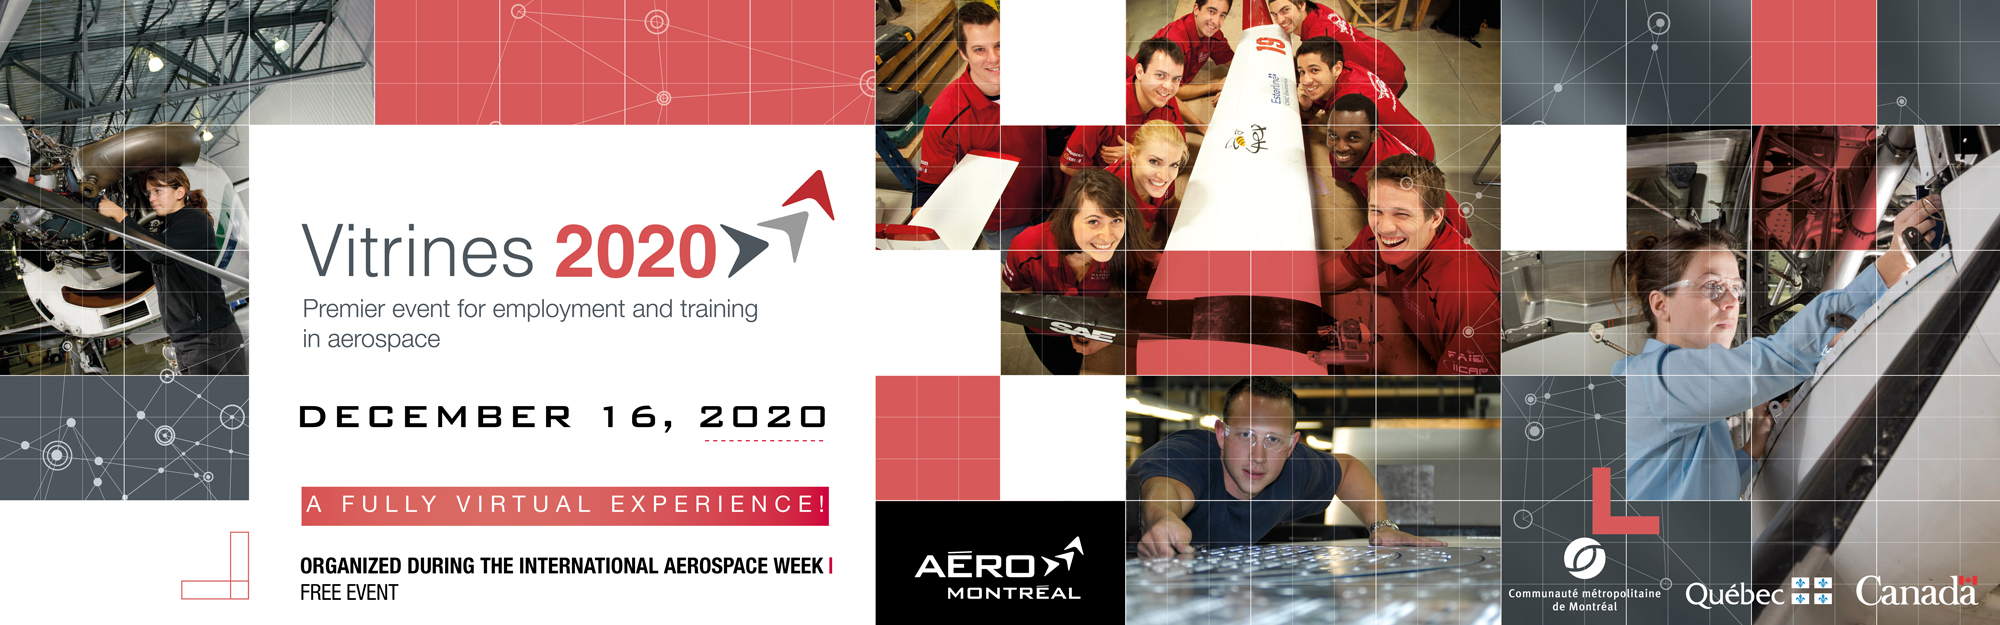 Vitrines 2020: Premier event for employment and training in aerospace